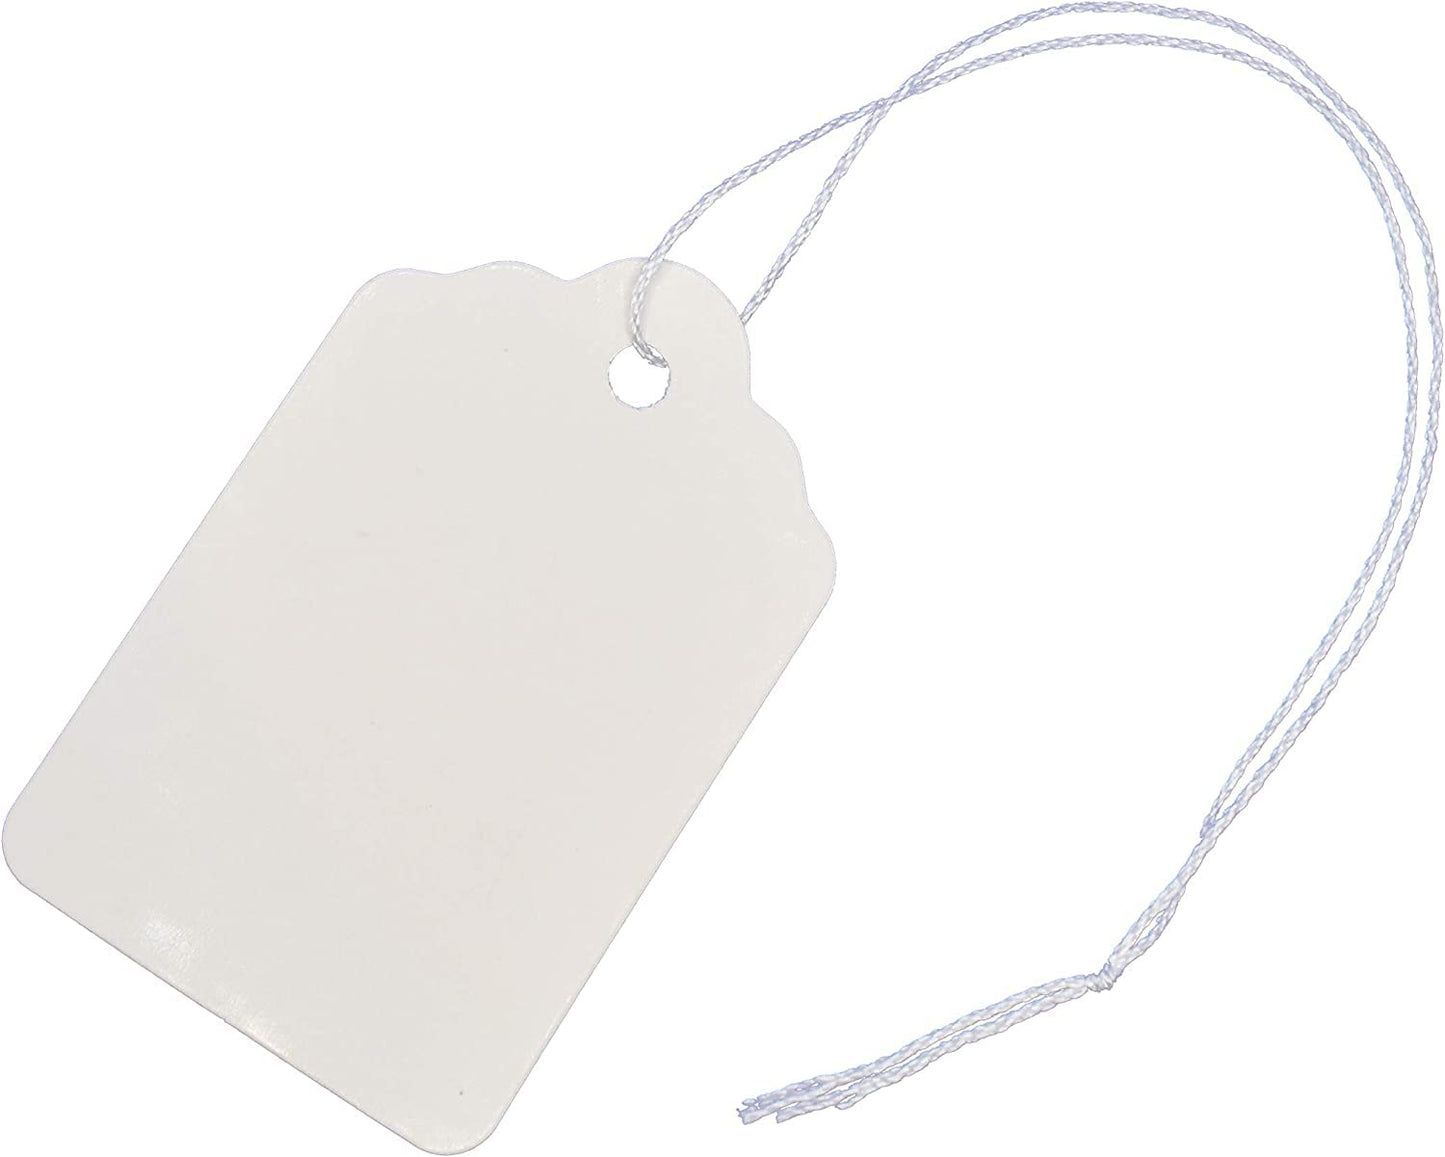 MARKQ 100 Pcs Gift Tags with strings, White Writable Label Price Tags for Pricing Merchandise Gifts Jewelry Clothing Display, Marking Tags